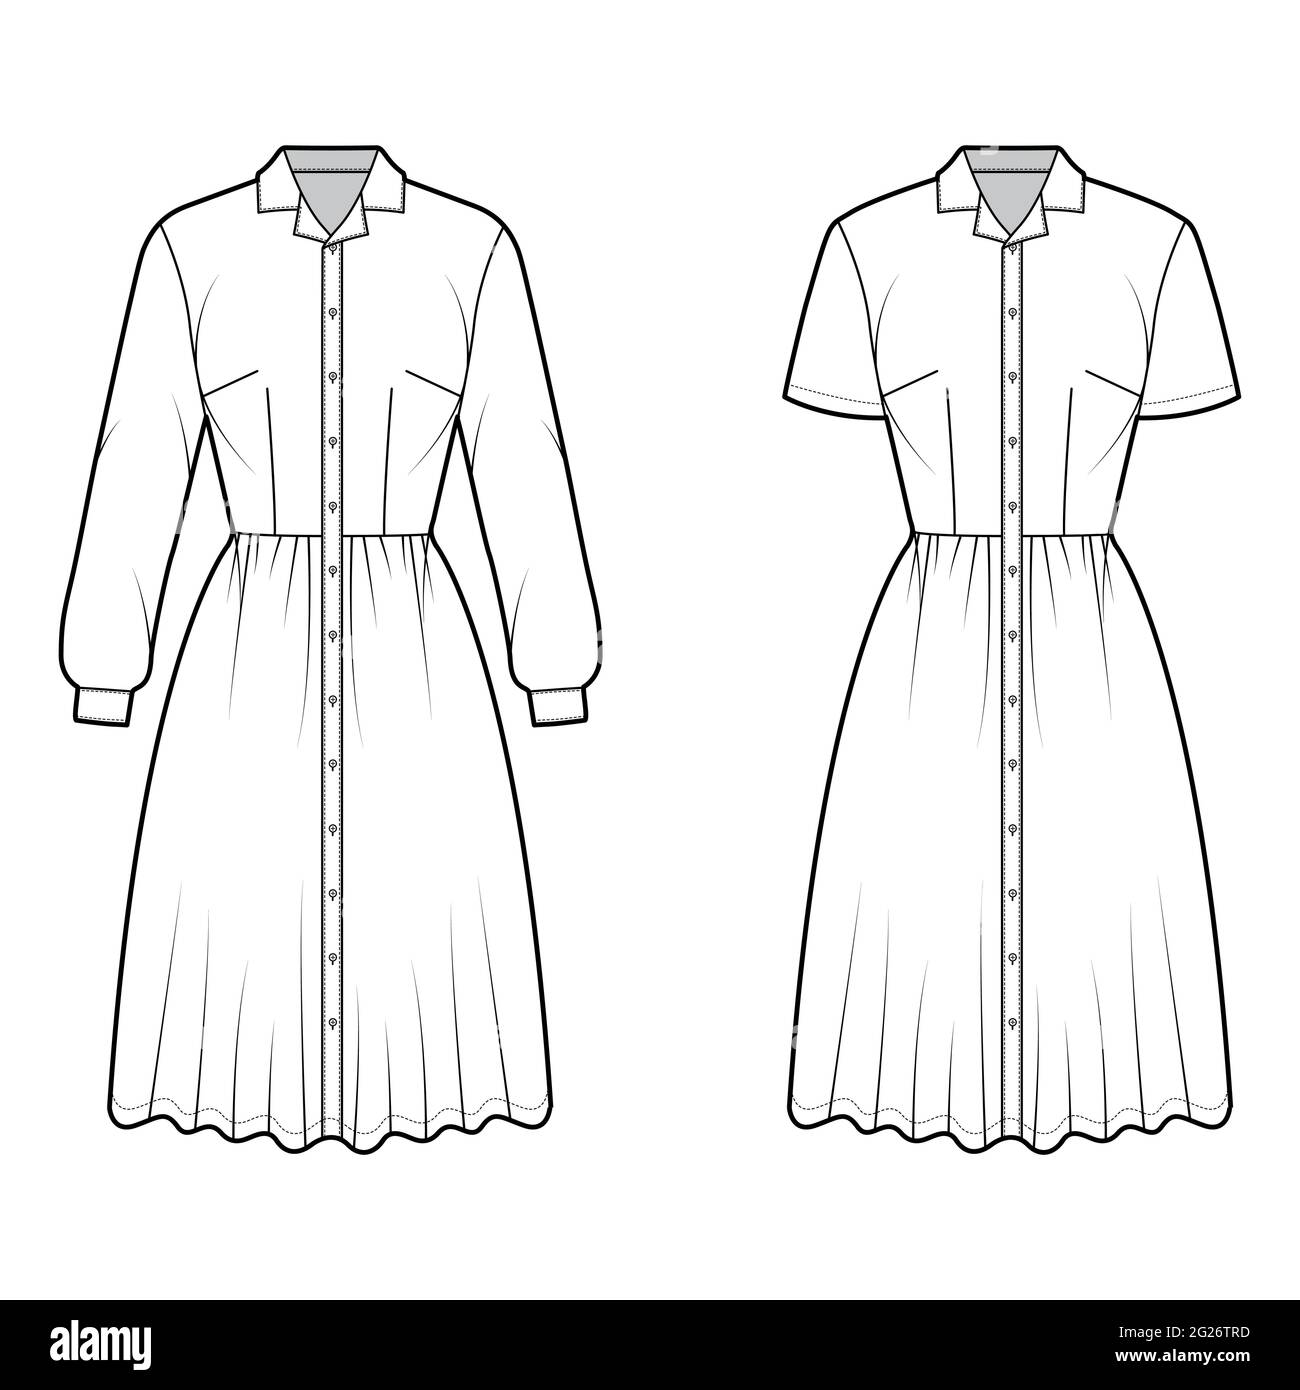 Set of Dresses shirt technical fashion illustration with short long sleeves, camp collar, knee length full skirt, button closure. Flat apparel front, white color style. Women, men unisex CAD Stock Vector